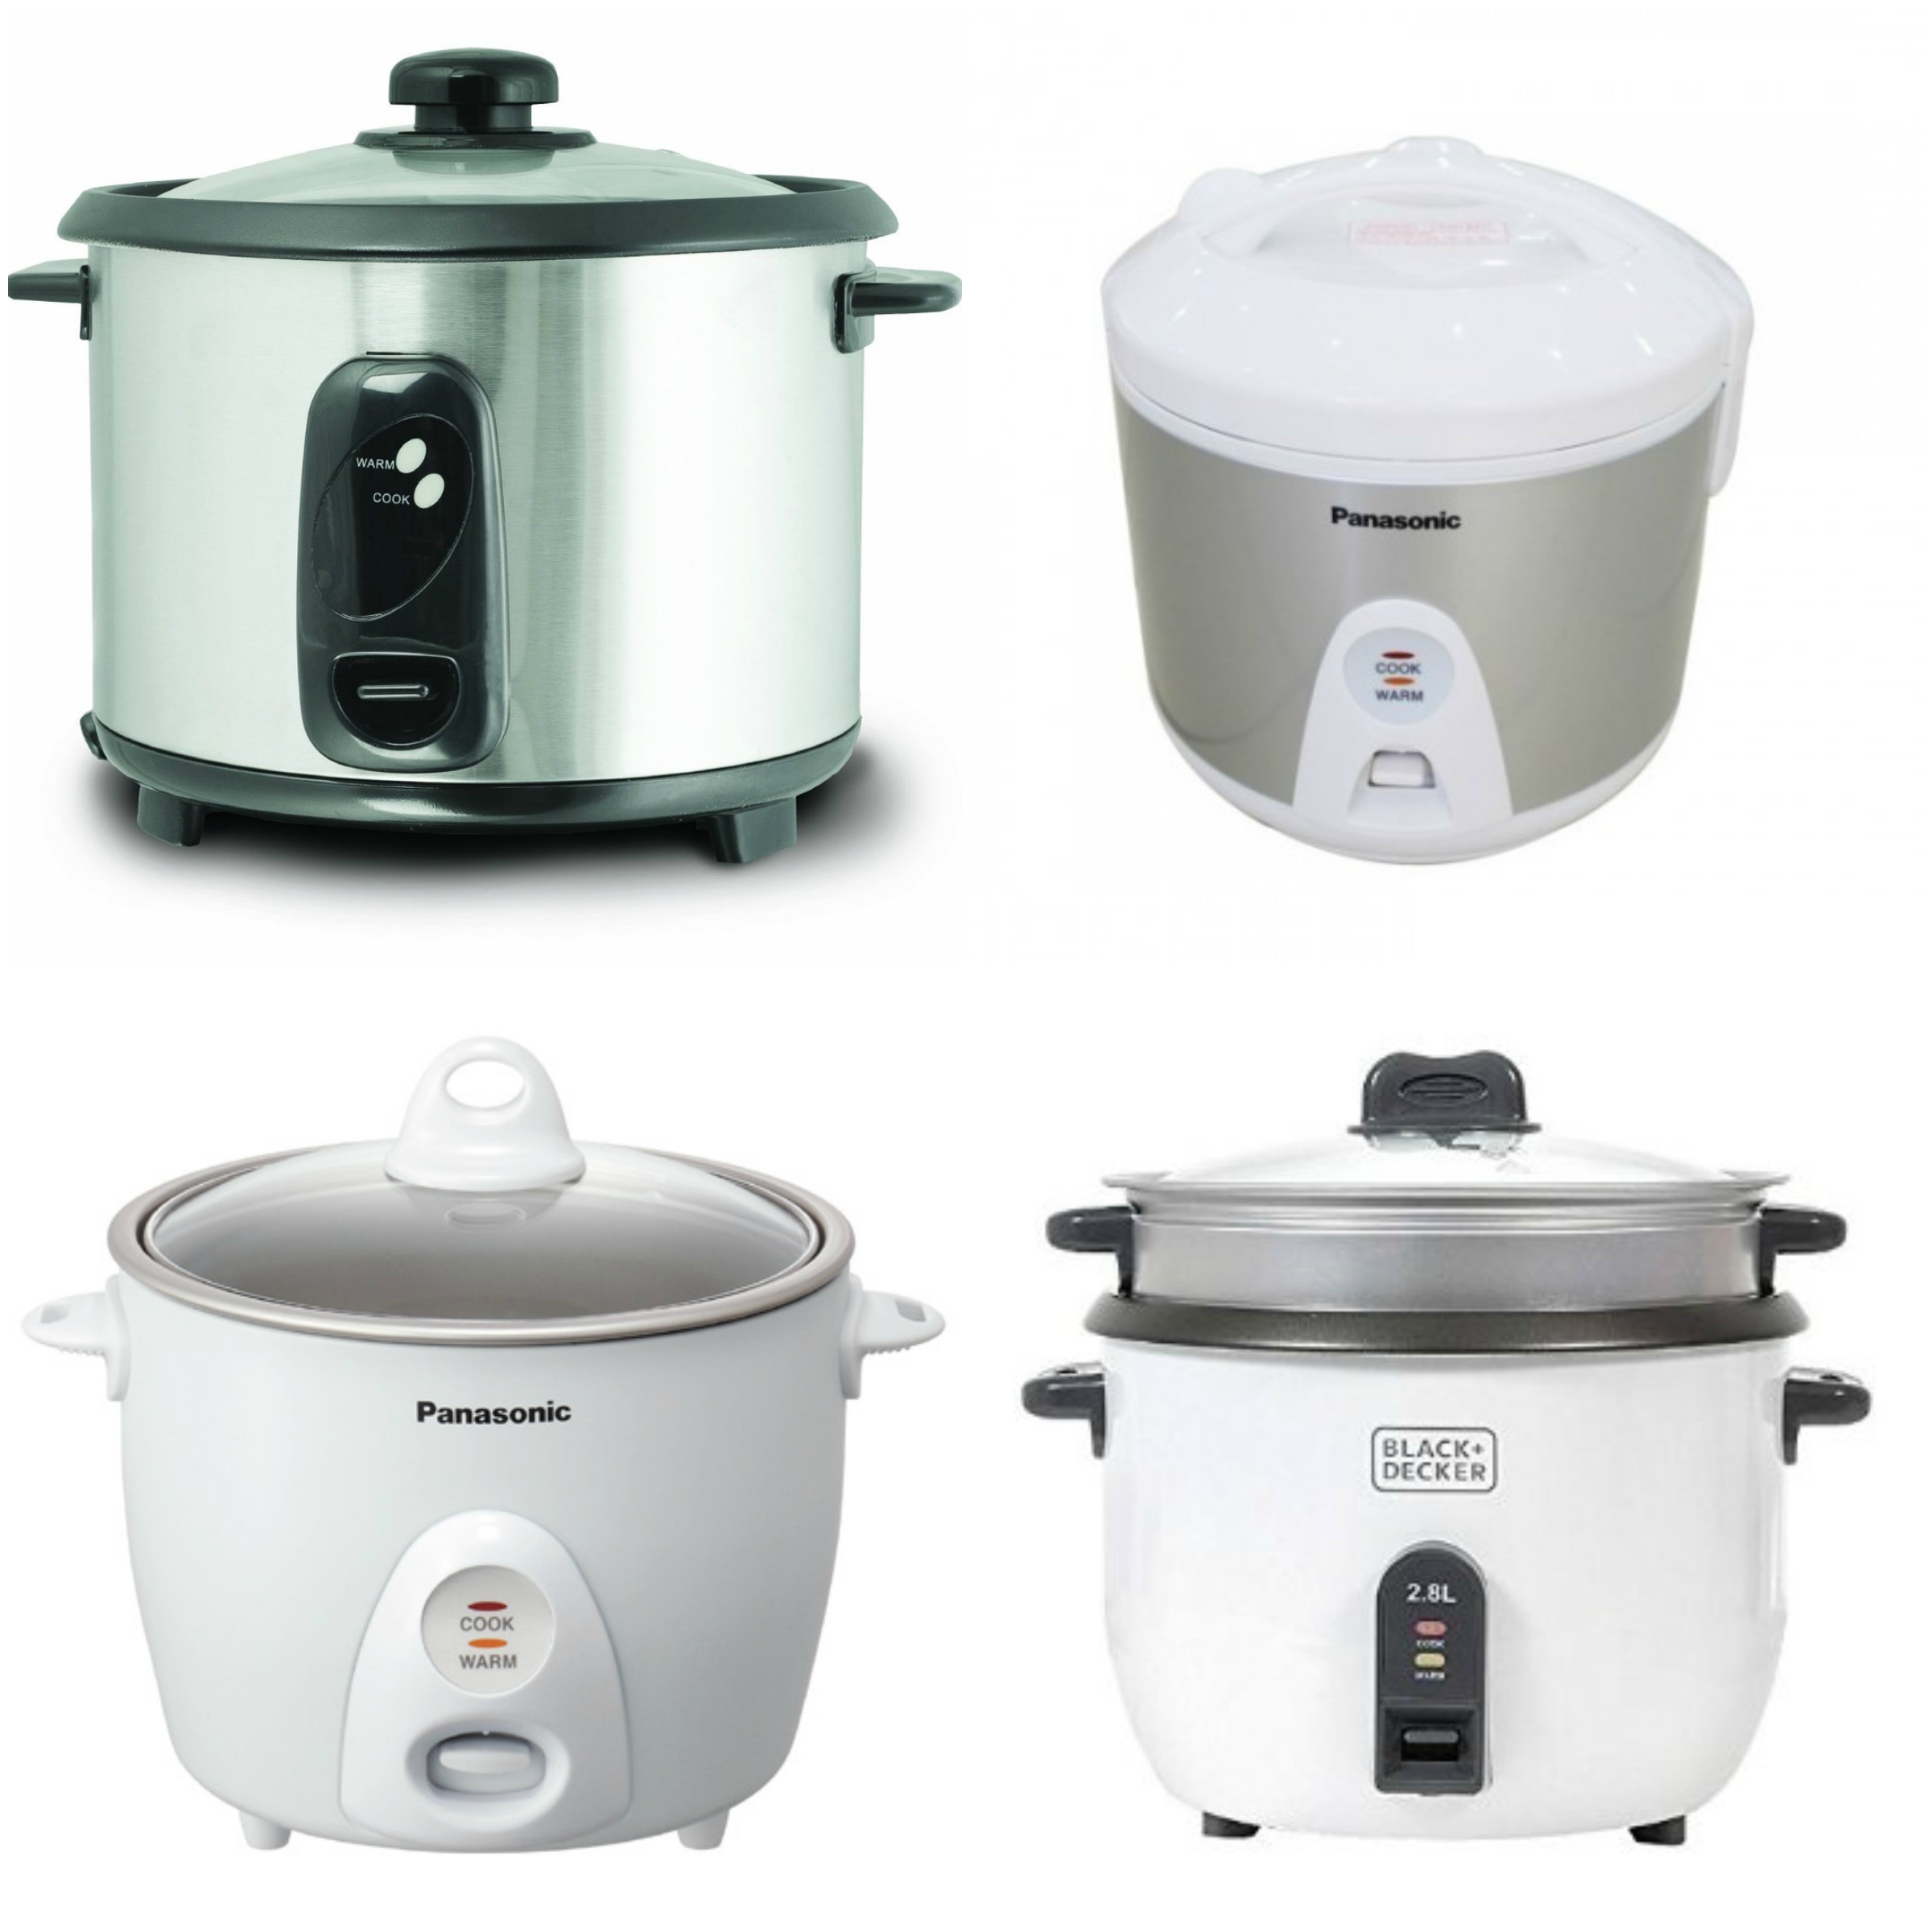 https://www.atozappliances.com/wp-content/uploads/2016/02/Rice-Cooker-Collage.jpg